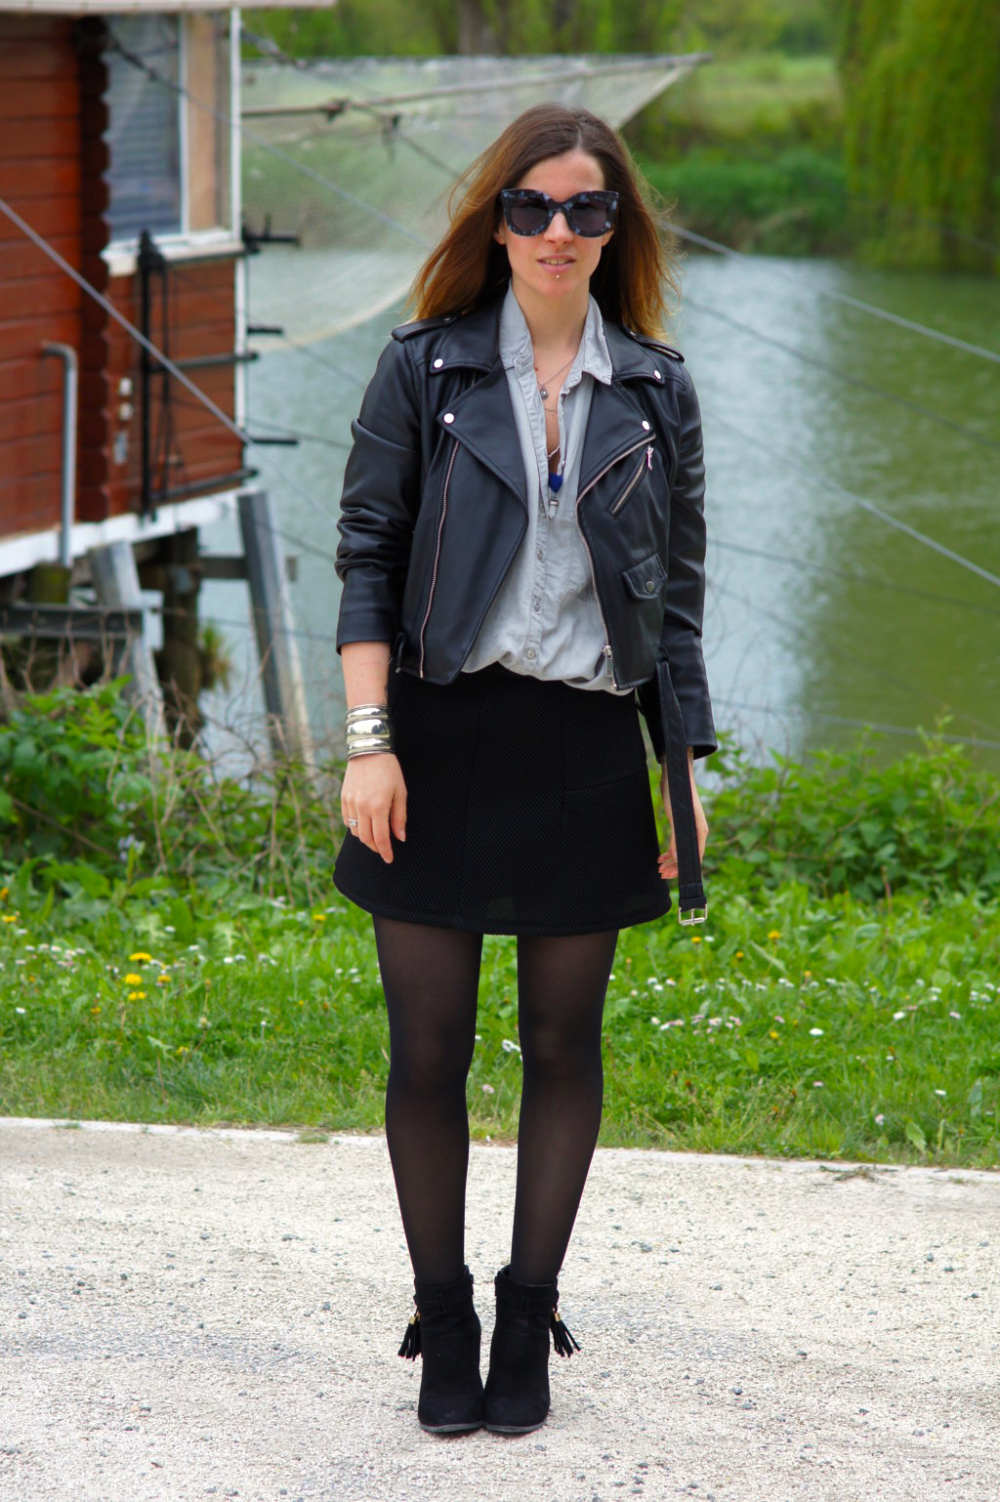 Street style grey tones - Fashionmylegs : The tights and hosiery blog